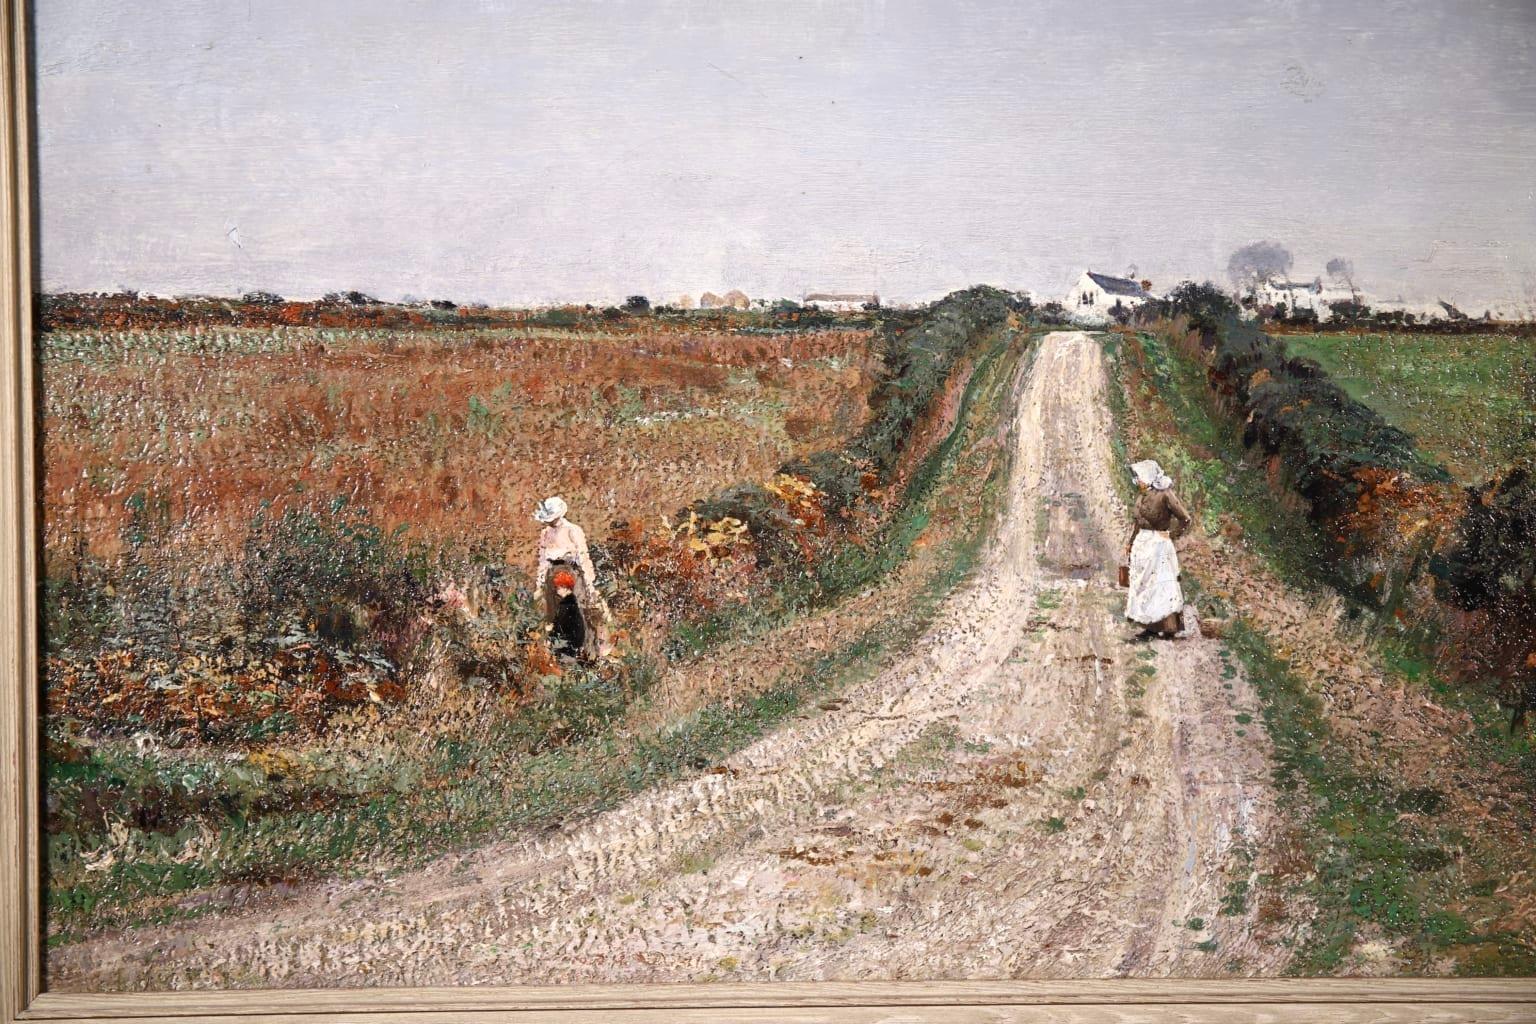 A wonderful oil on canvas c.1900 by Scottish impressionist painter William Page Atkinson Wells. The piece depicts a woman on a track in Breton clothing looking on as a mother and child pick wildflowers in the adjoining field. The white houses of the